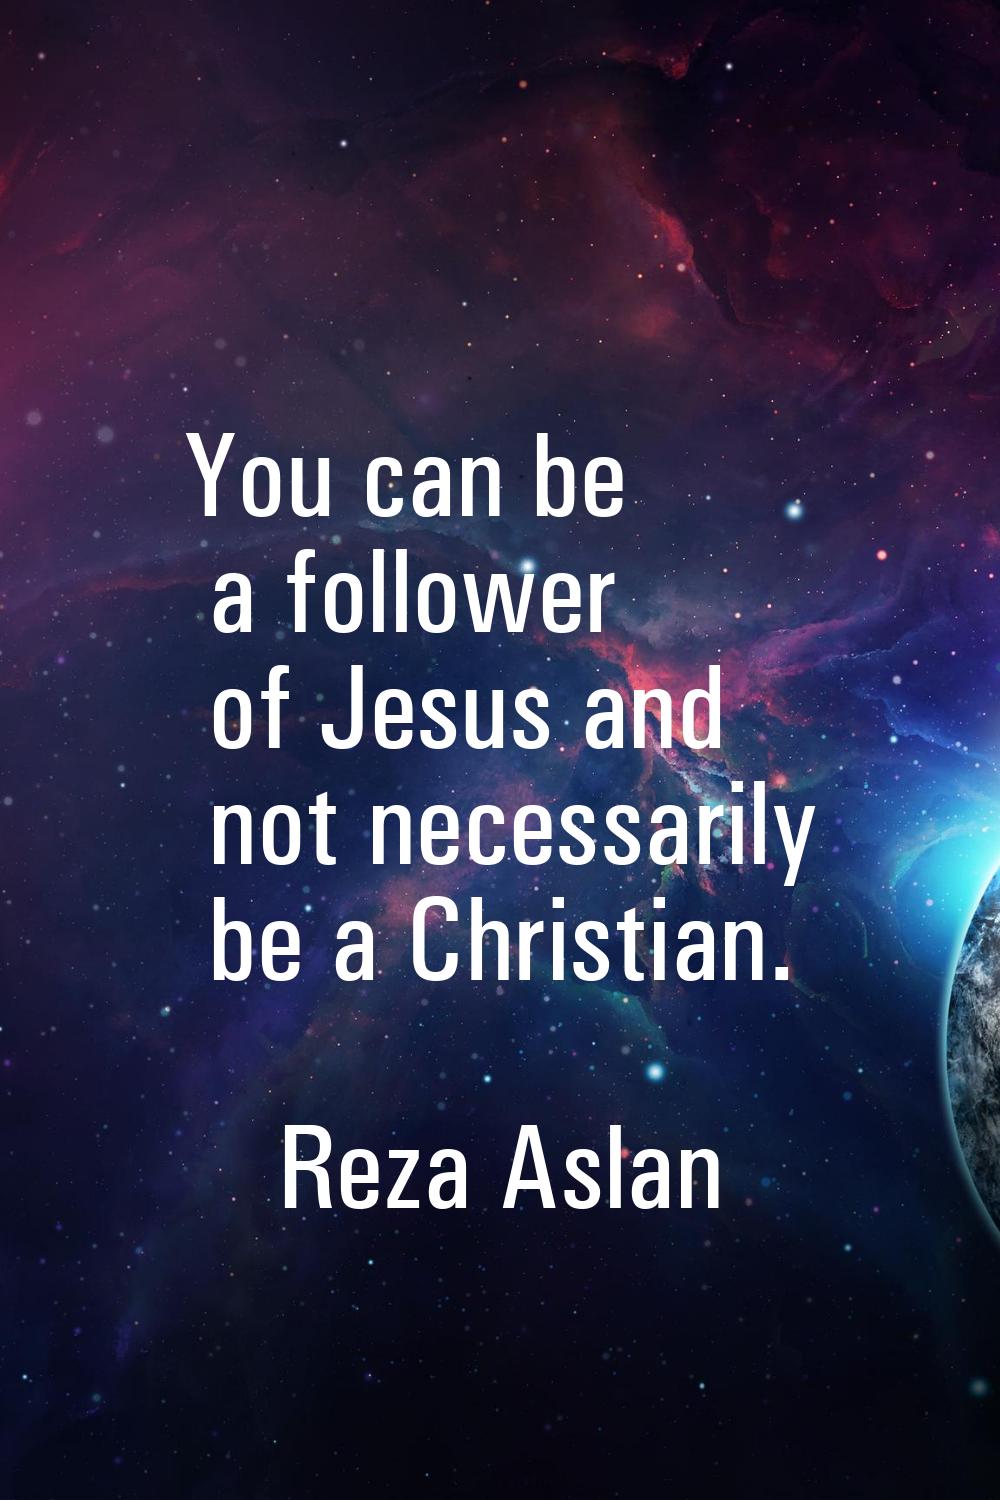 You can be a follower of Jesus and not necessarily be a Christian.